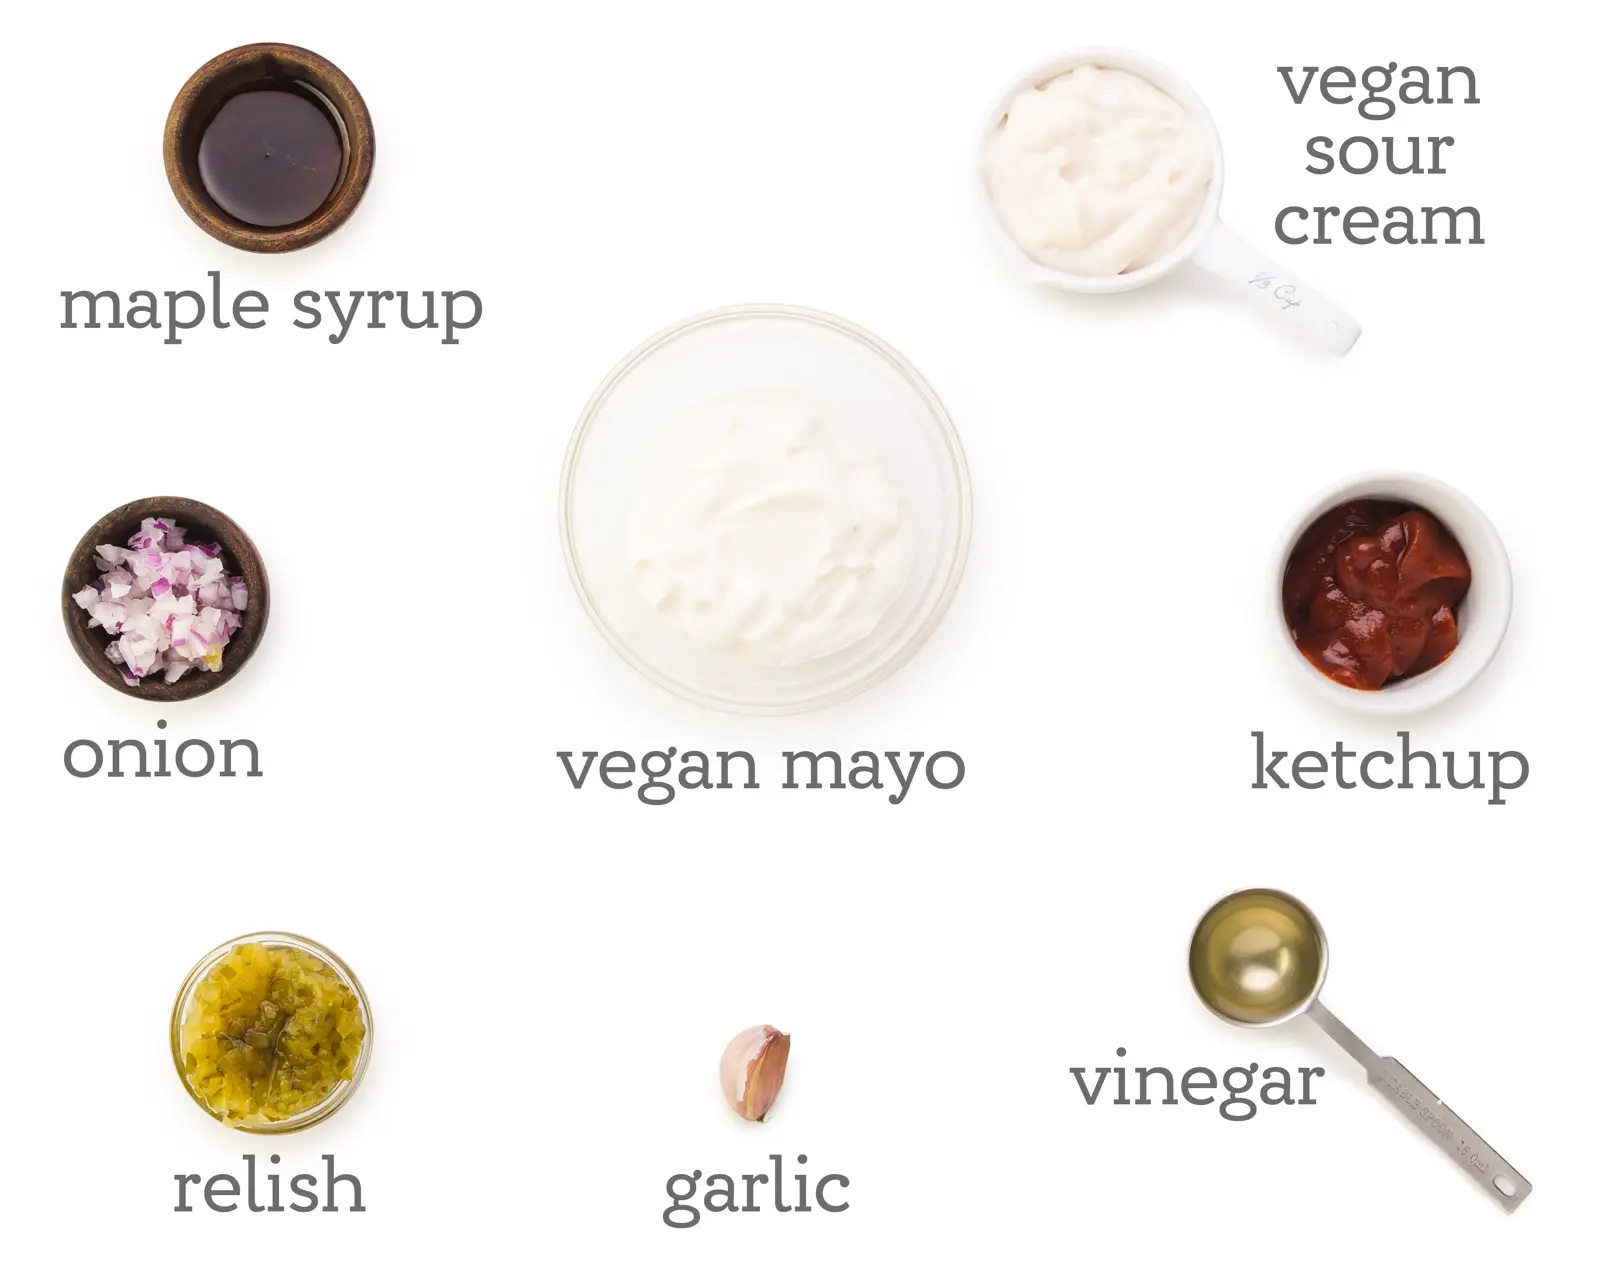 Ingredients are laid out on a white counter. The labels next to them read, vegan sour cream, ketchup, vinegar, garlic, relish, onion, maple syrup, and vegan mayo.